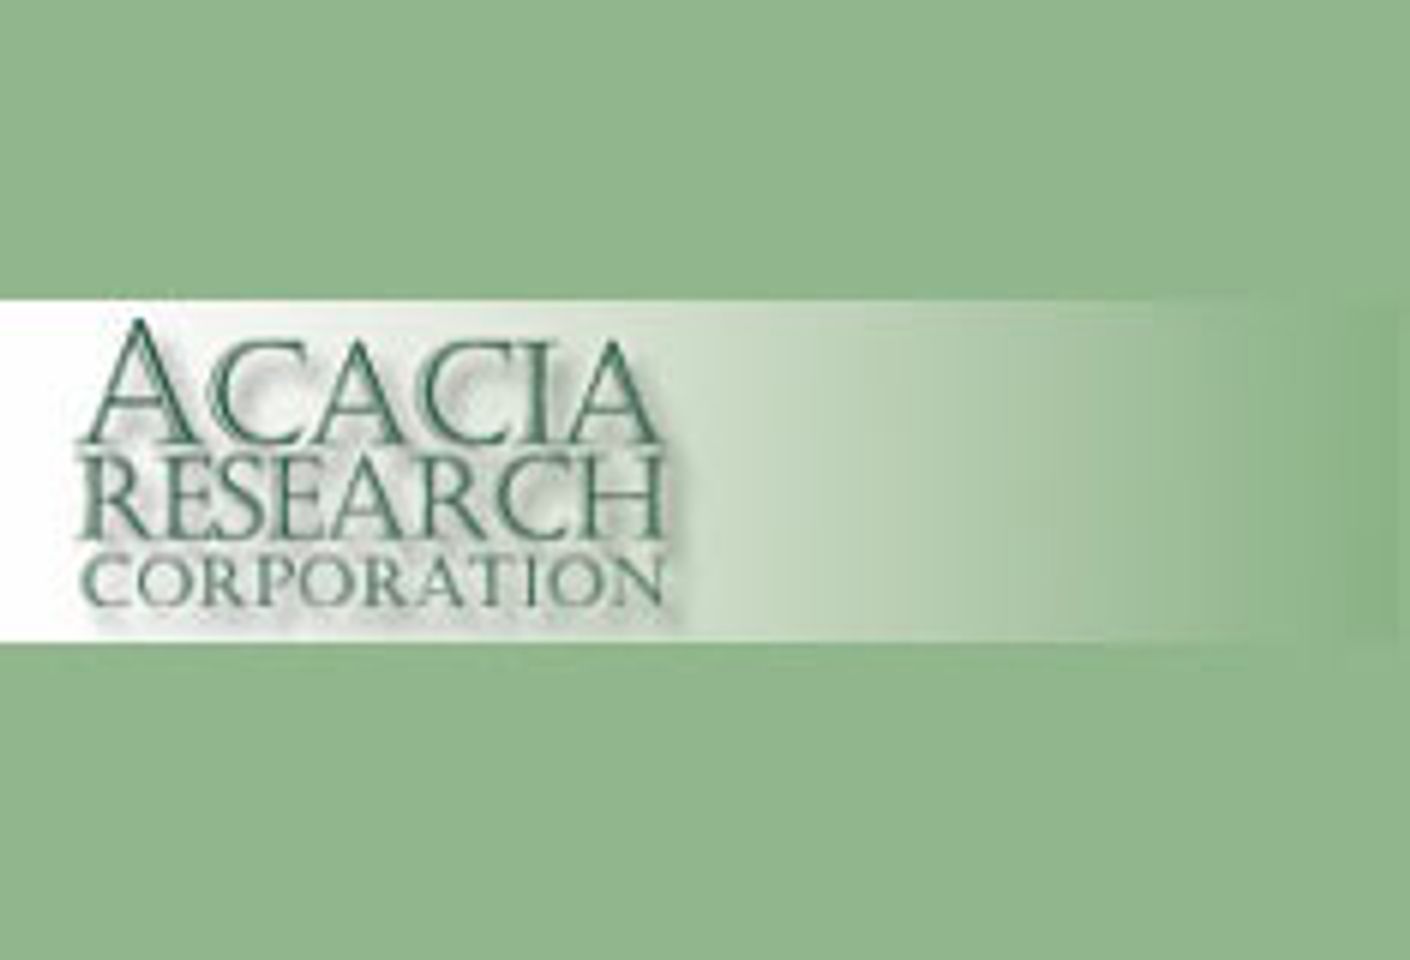 Acacia Completes Patent Purchases, Promotes Two